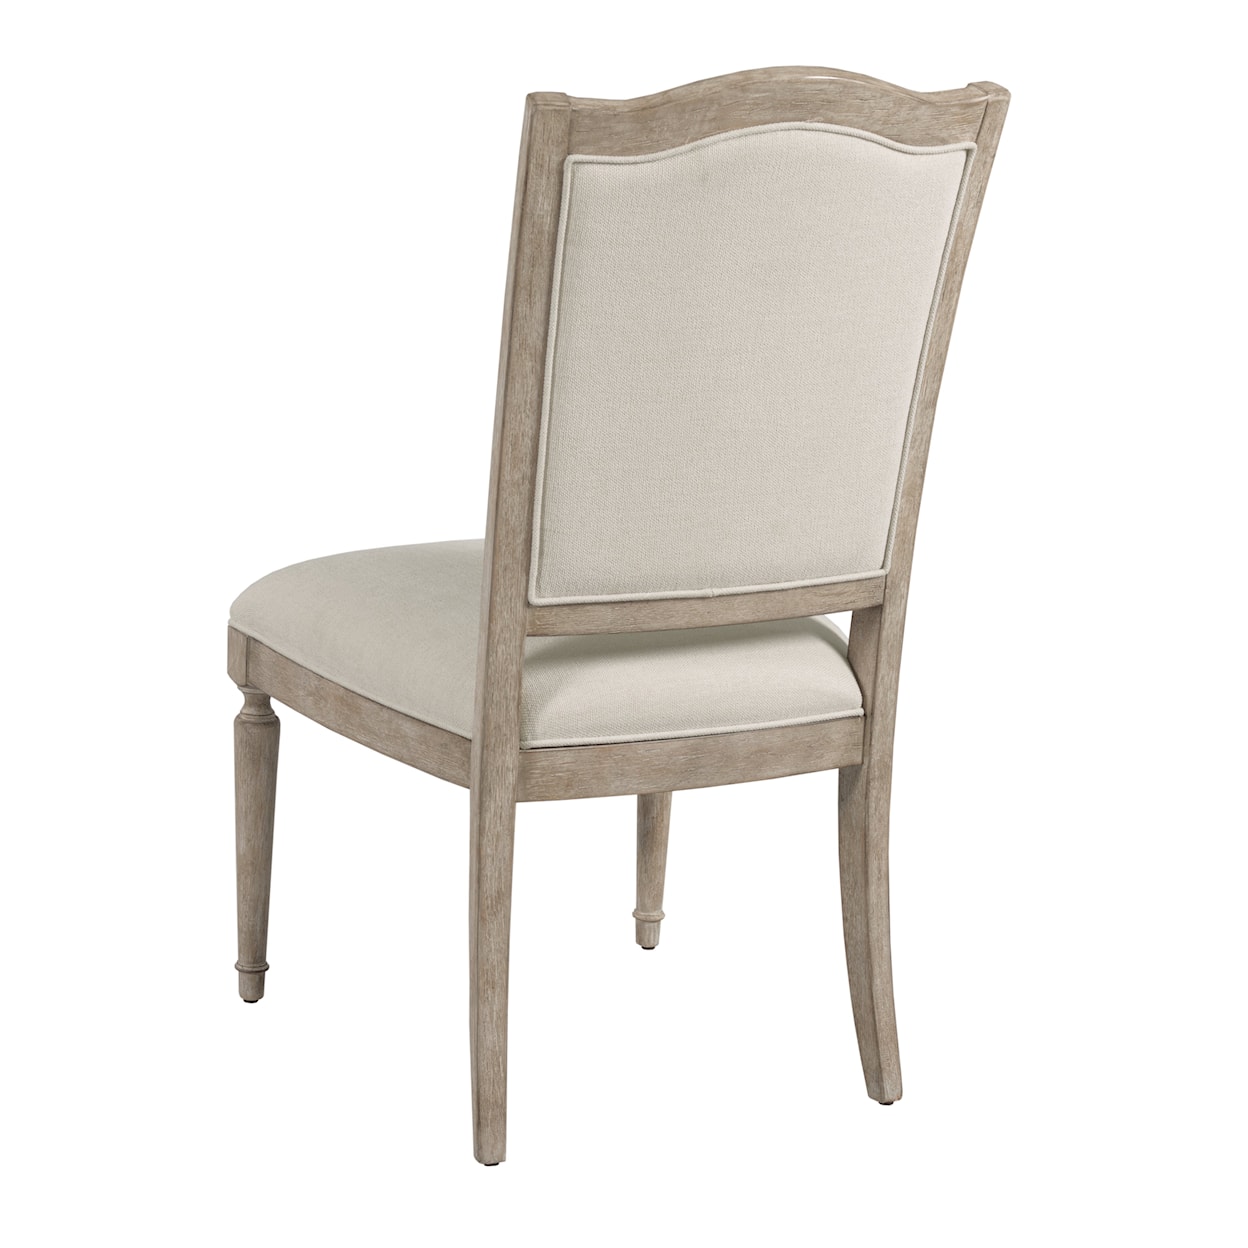 American Drew Cambric Upholstered Side Chair